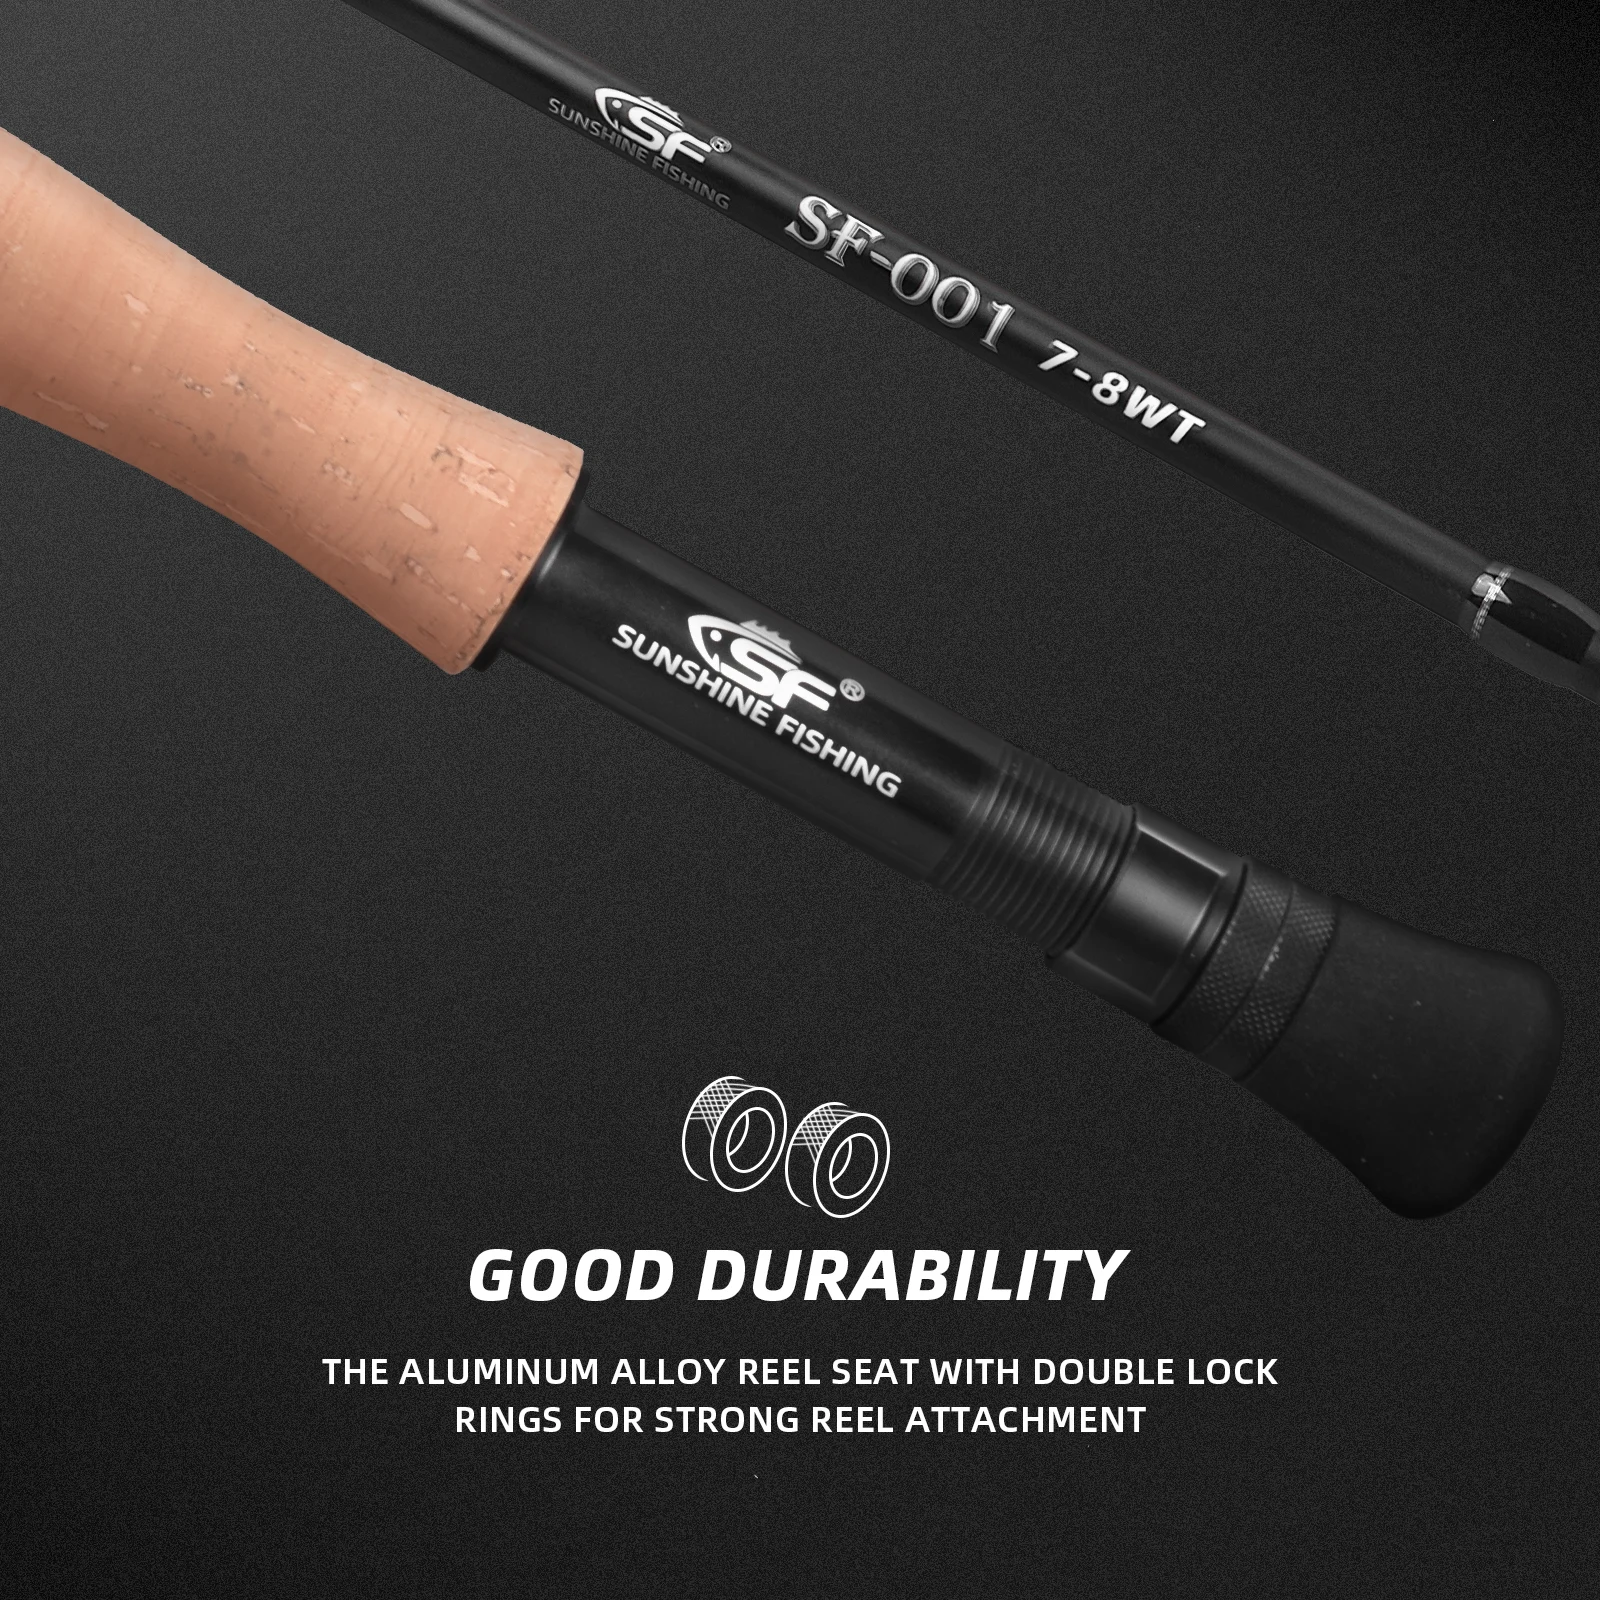 SF Fly Fishing Rod with Straight Rod Bag 4 Piece 7.6FT 9FT 3/4/5/6/7/8wt Matt Black Trout Fly Rod IM7 Carbon Fiber for beginners enlarge